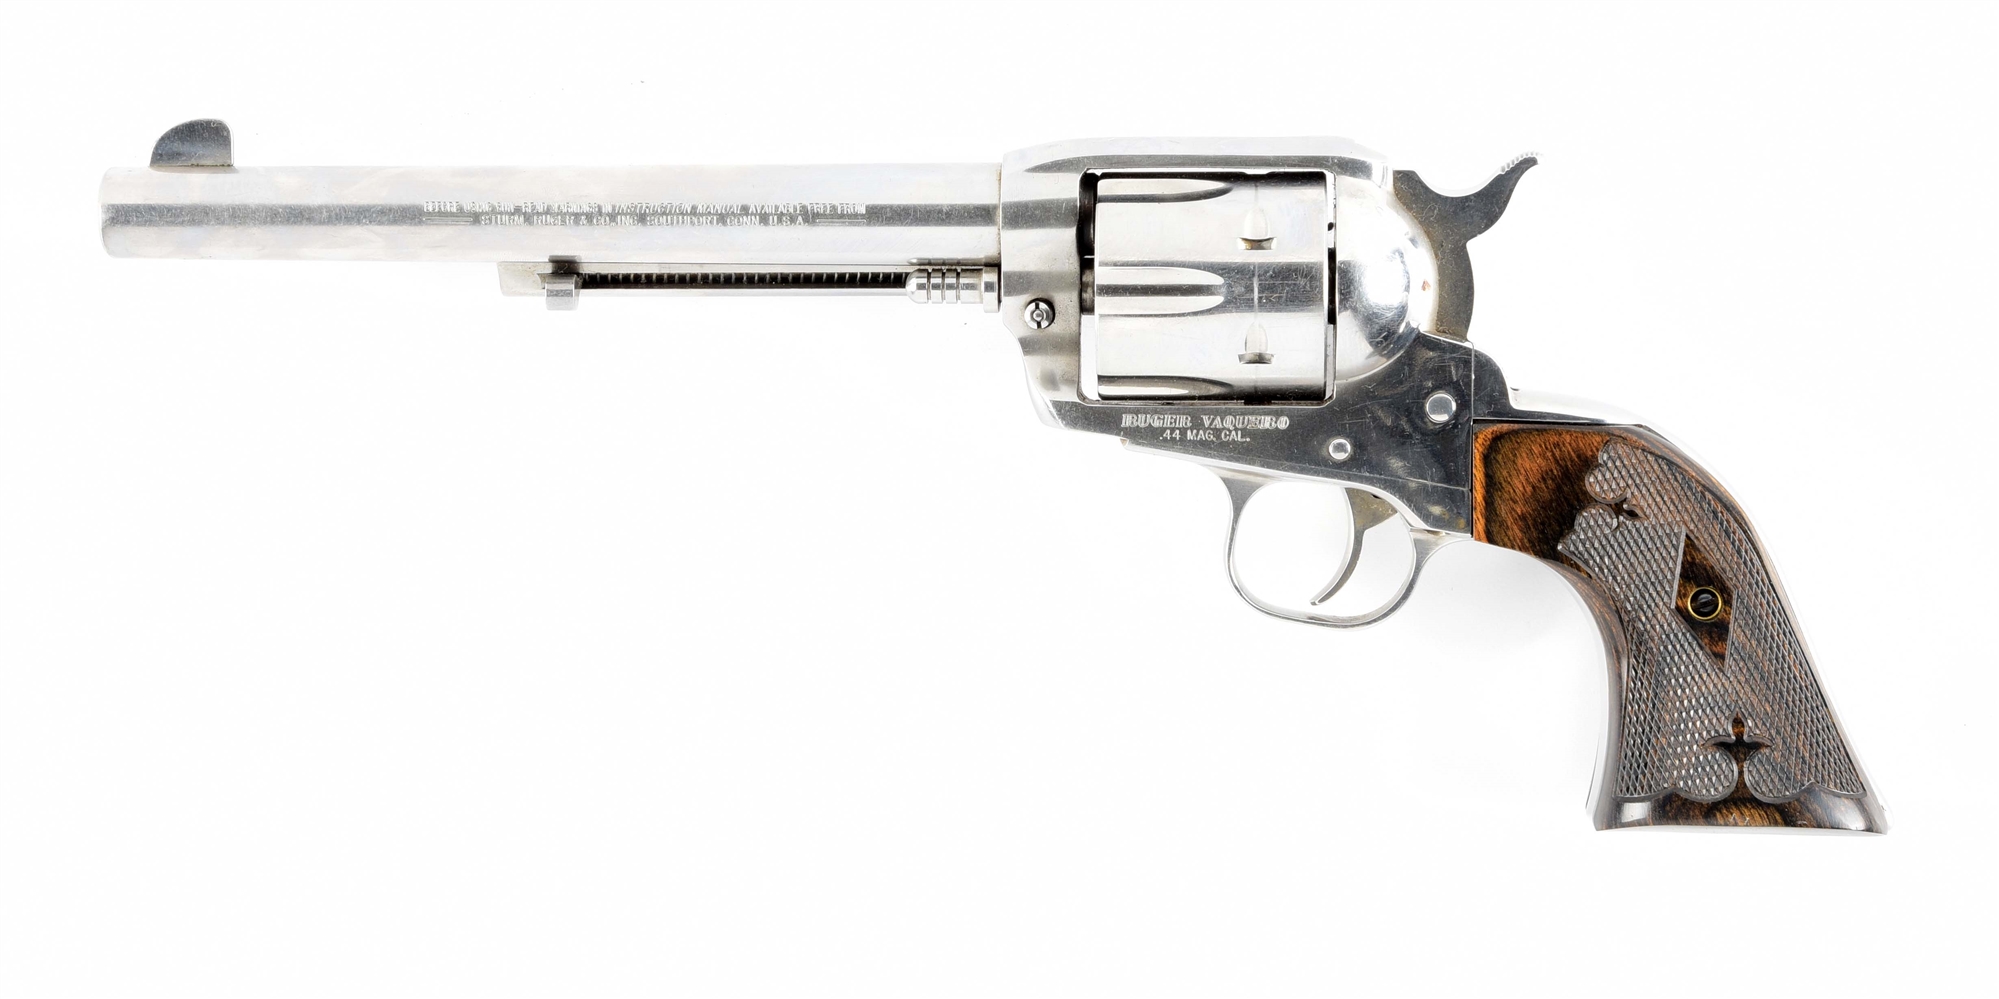 (M) STAINLESS STEEL RUGER VAQUERO .44 MAGNUM SINGLE ACTION REVOLVER (2001).